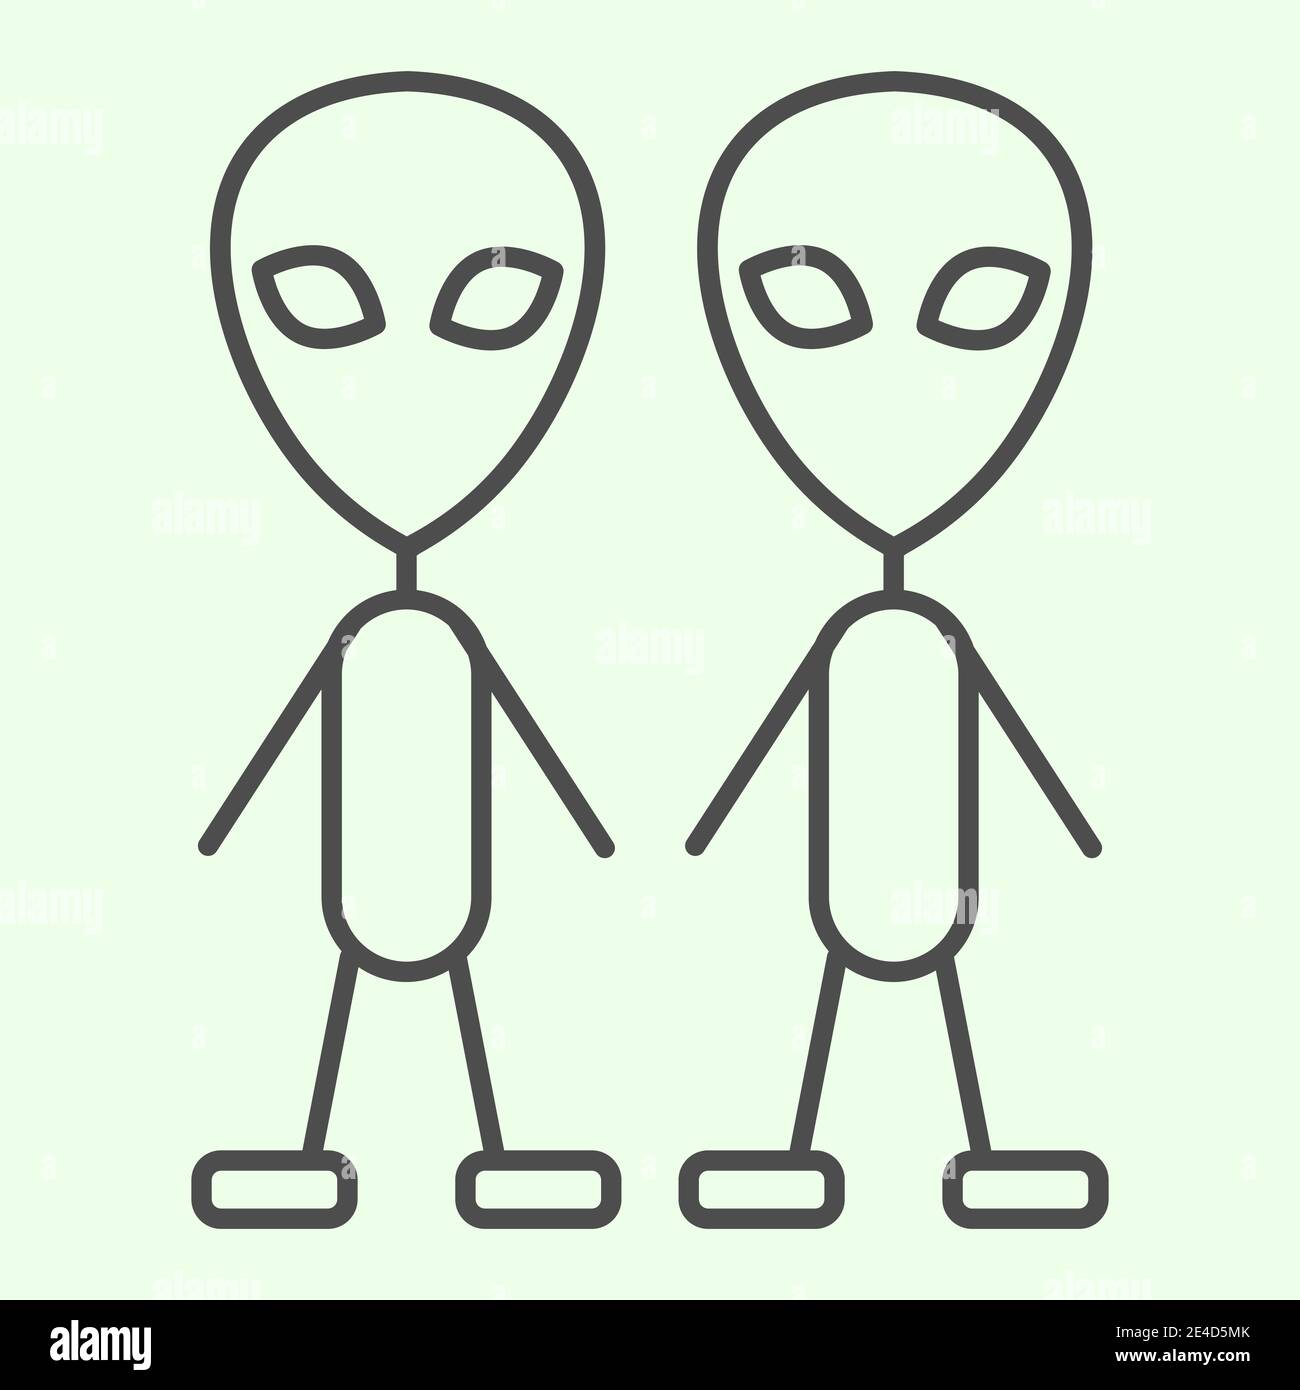 Cosmic strangers thin line icon. Two martian extraterrestrial aliens outline style pictogram on white background. Exploration space signs for mobile Stock Vector